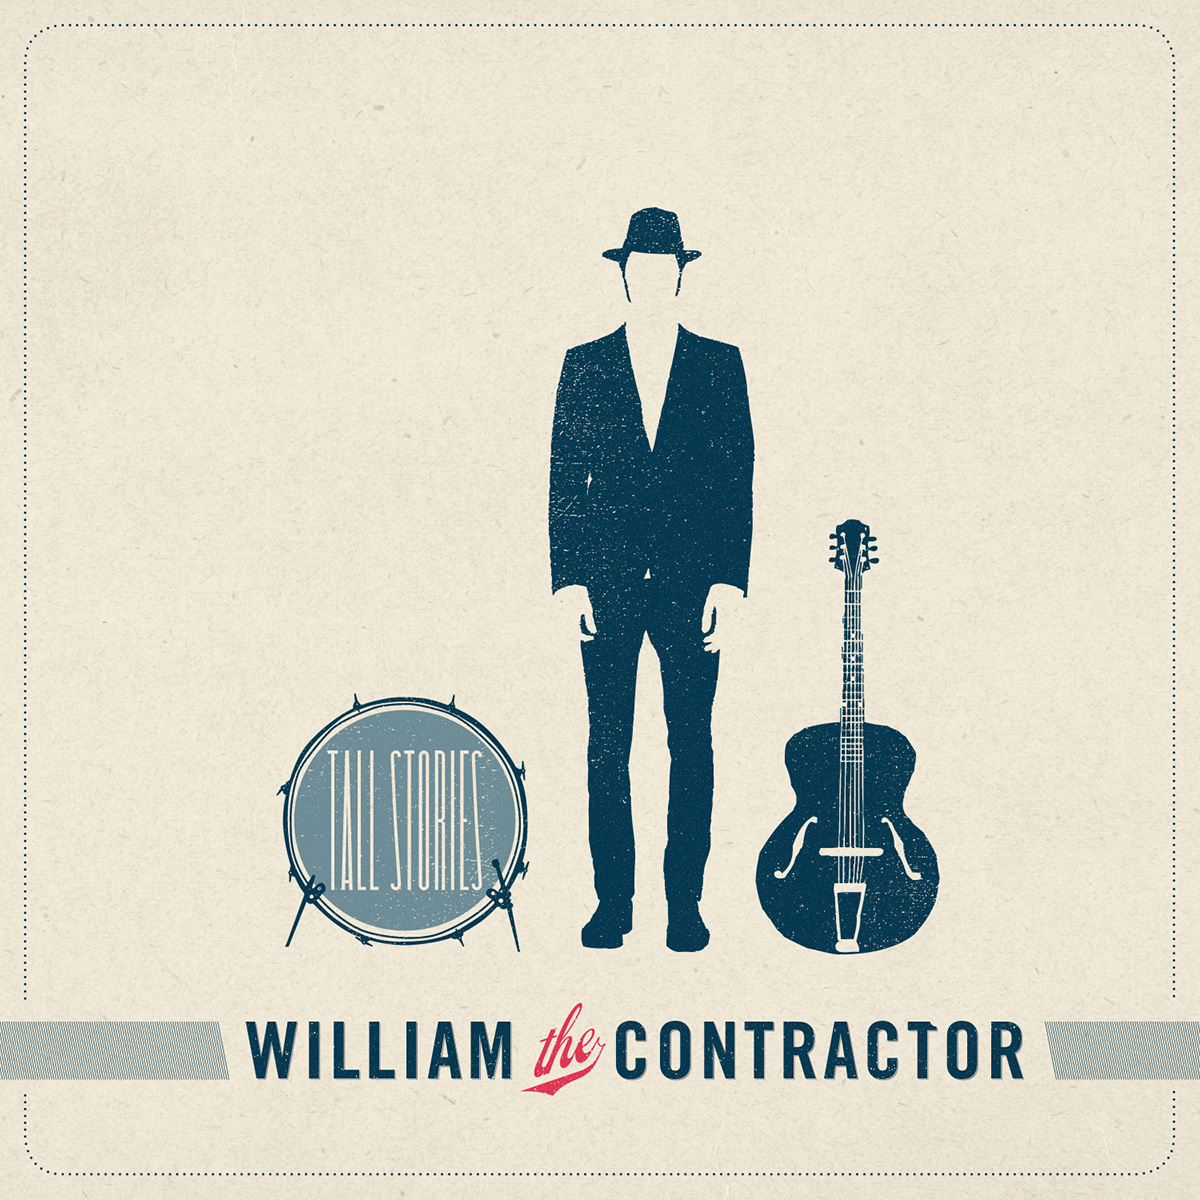 William The Contractor - Tall Stories